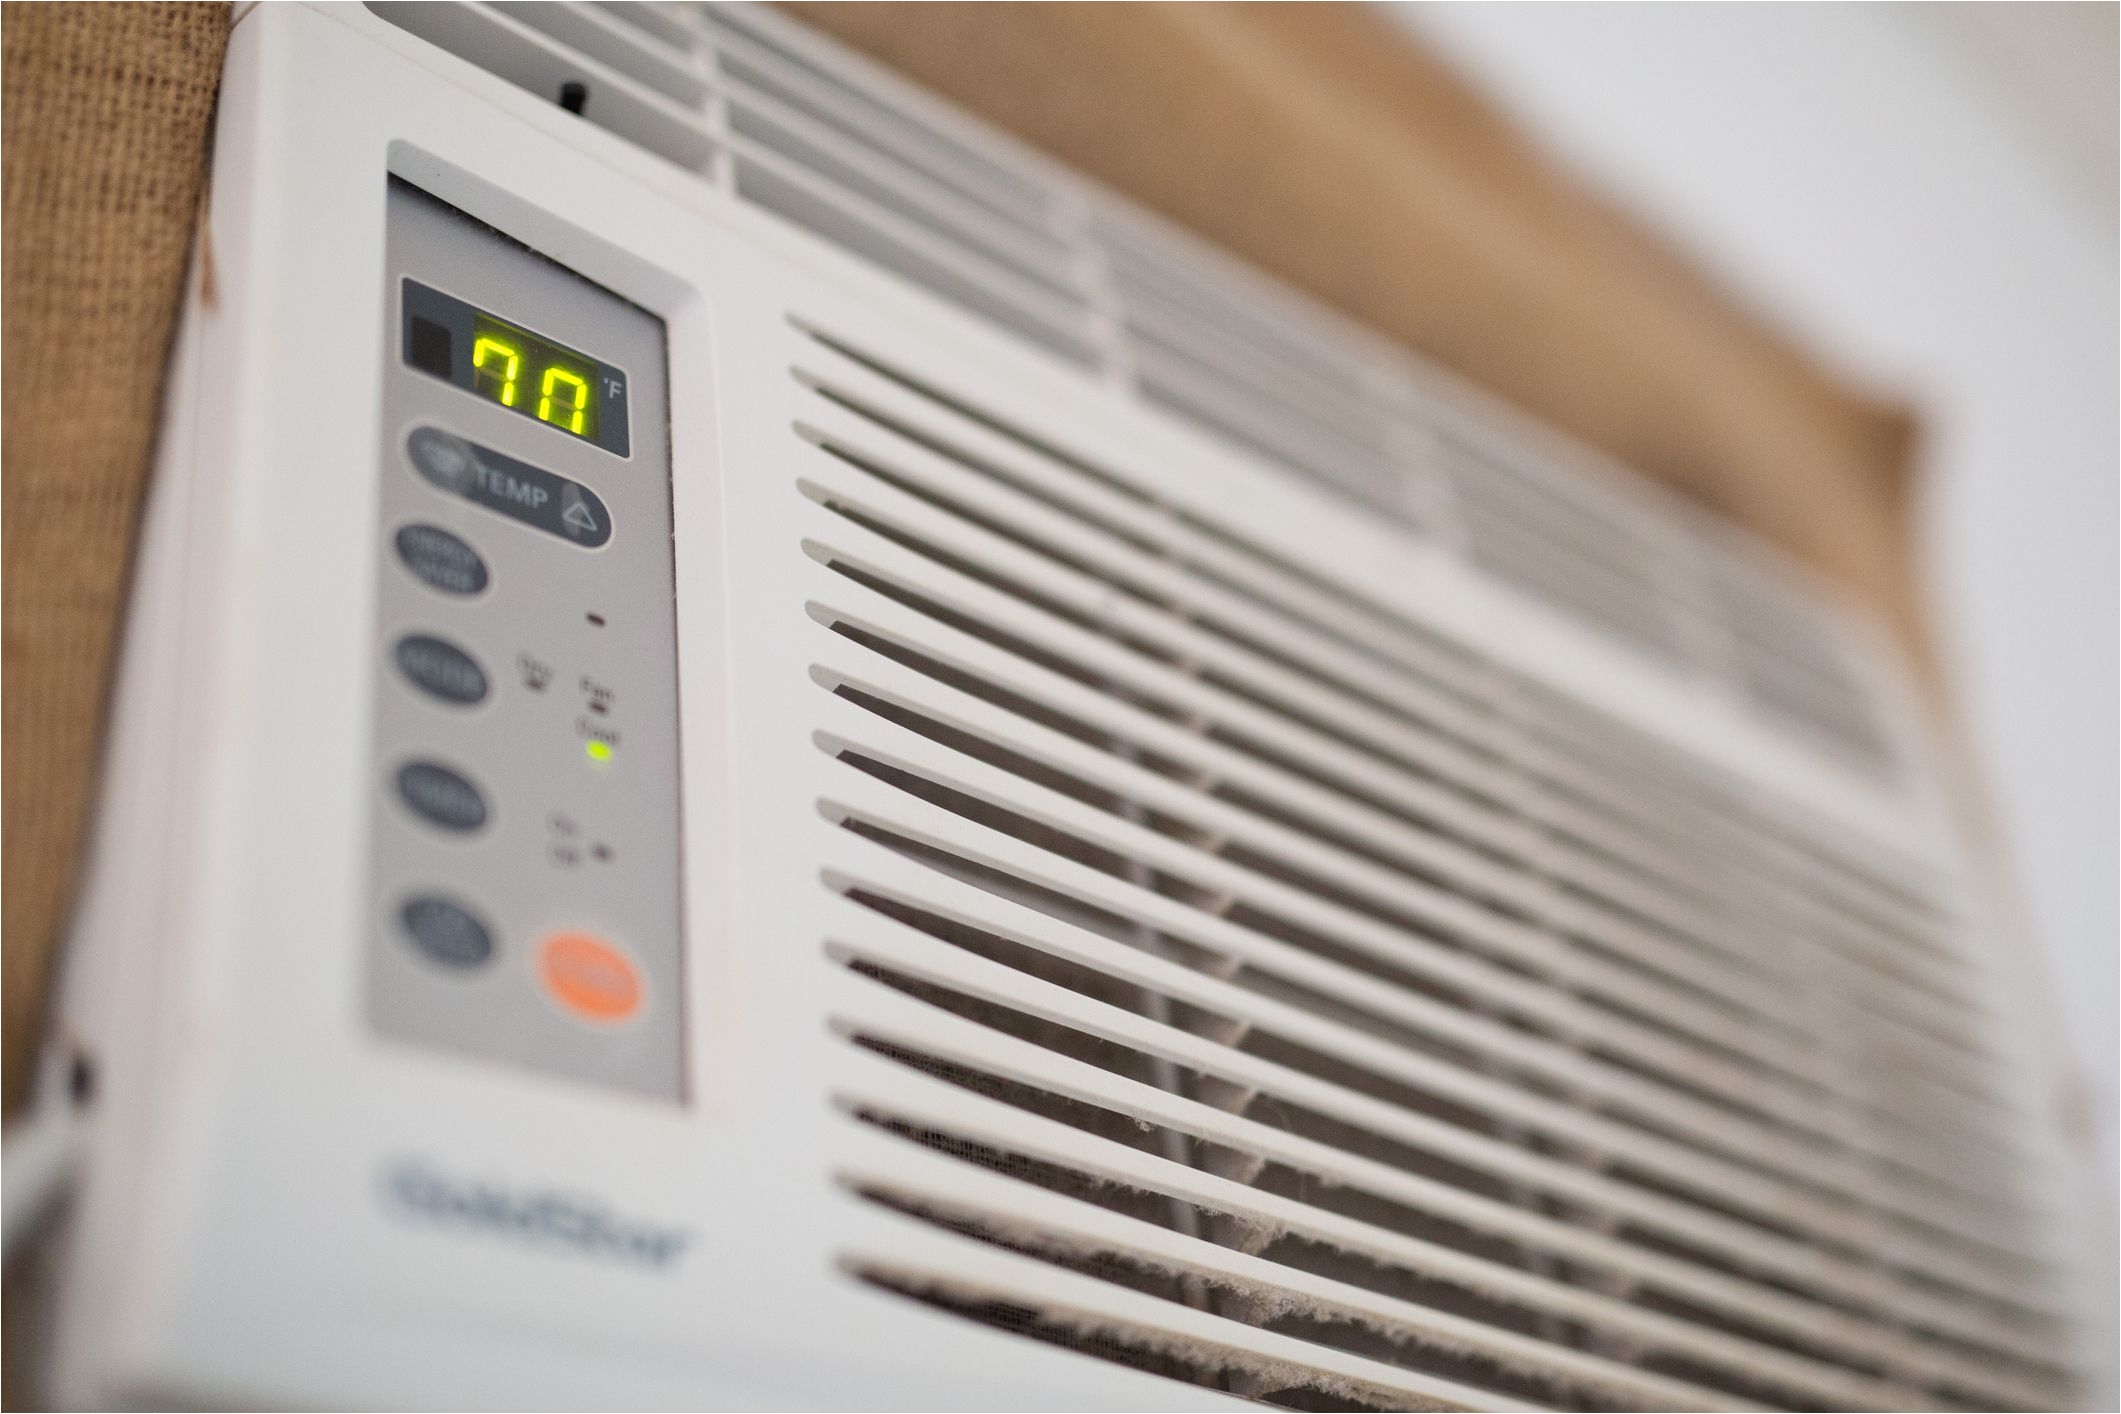 airconditioner gettyimages 525397795 58f110e93df78cd3fc1b6598 jpg